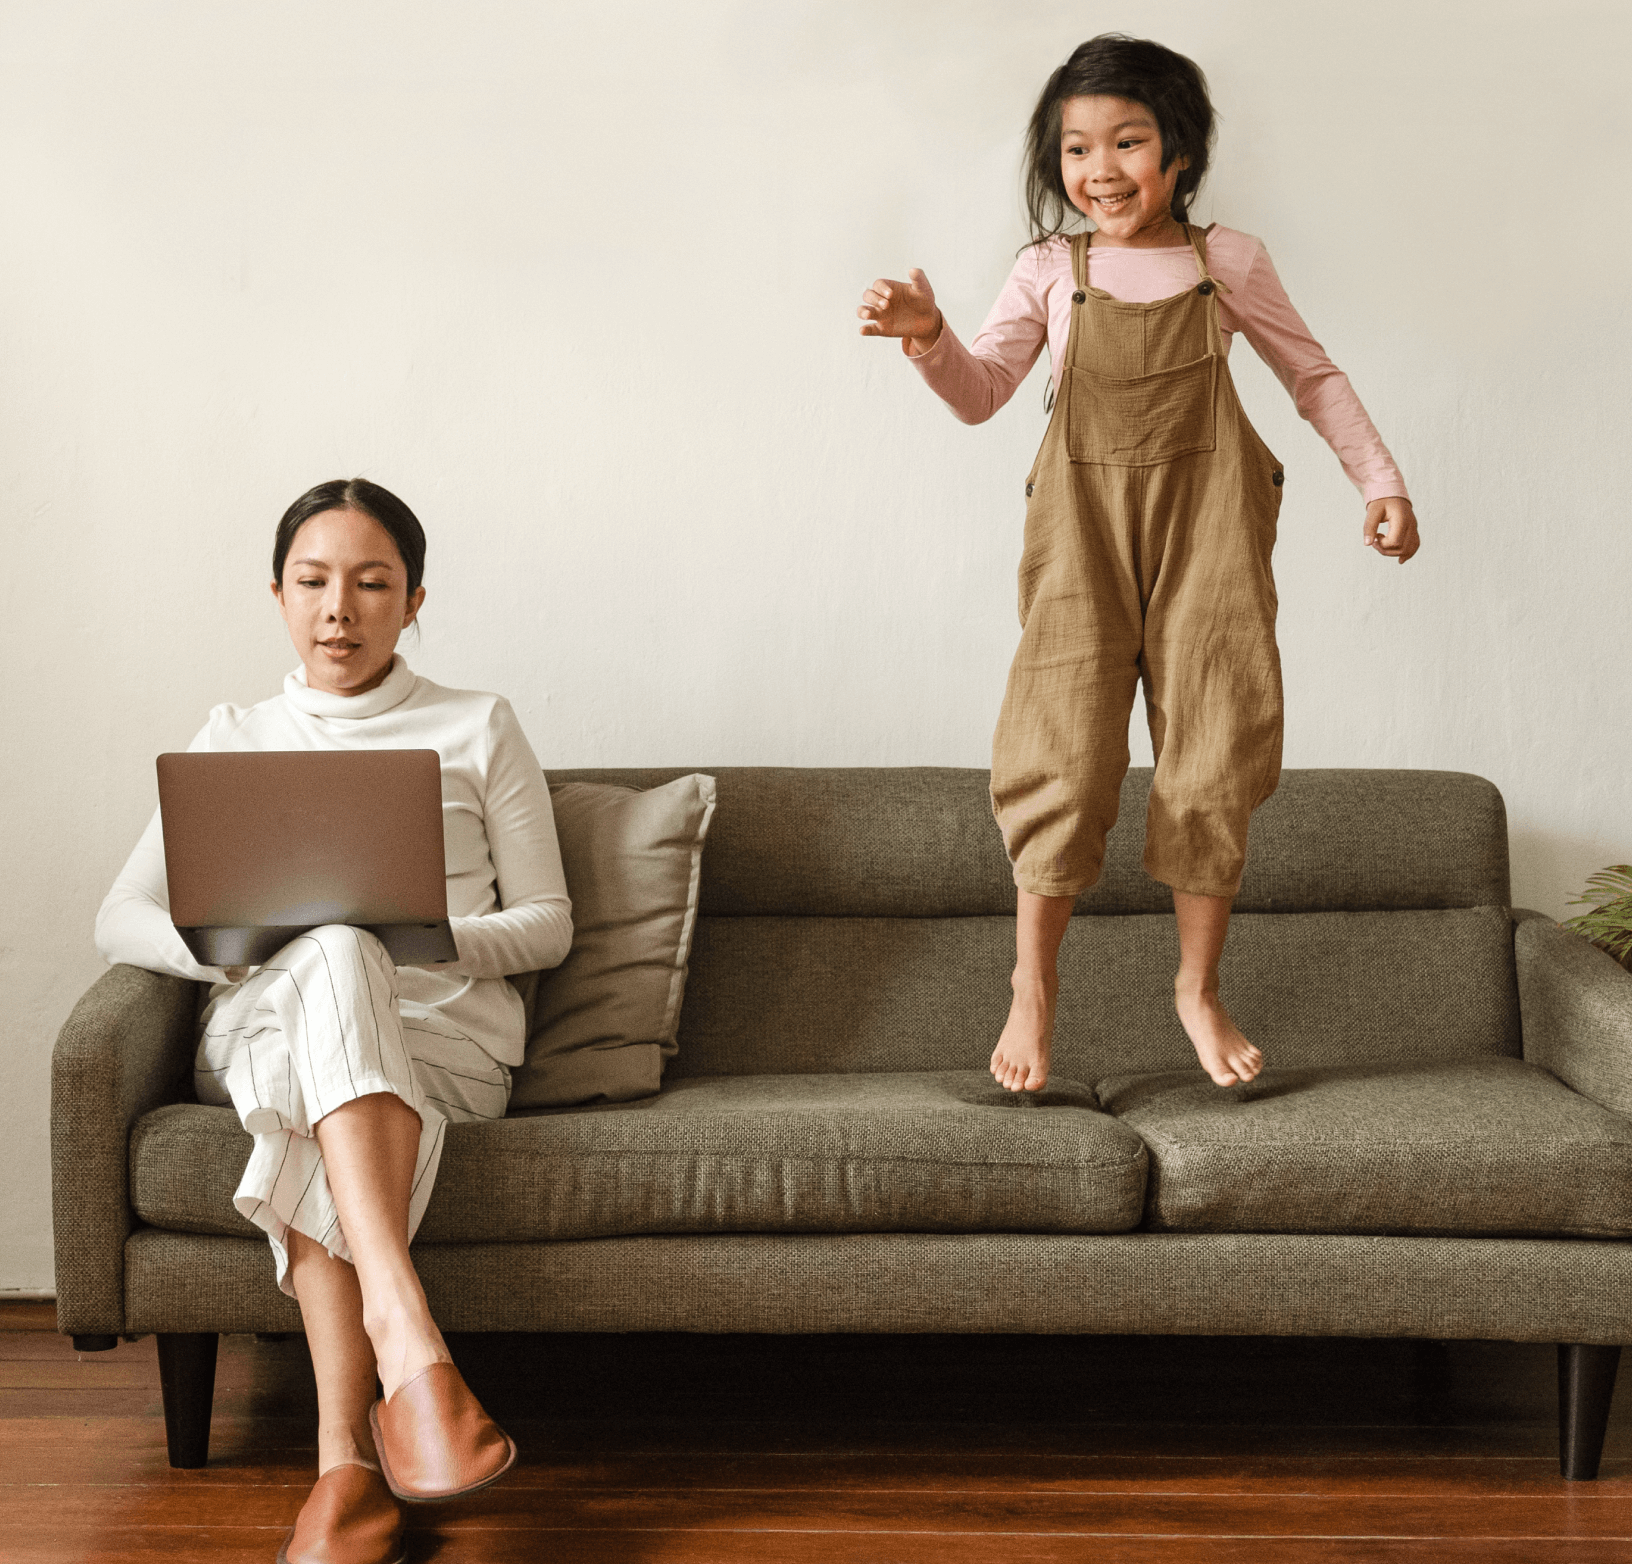 Mother on a couch with device, child jumping on the couch